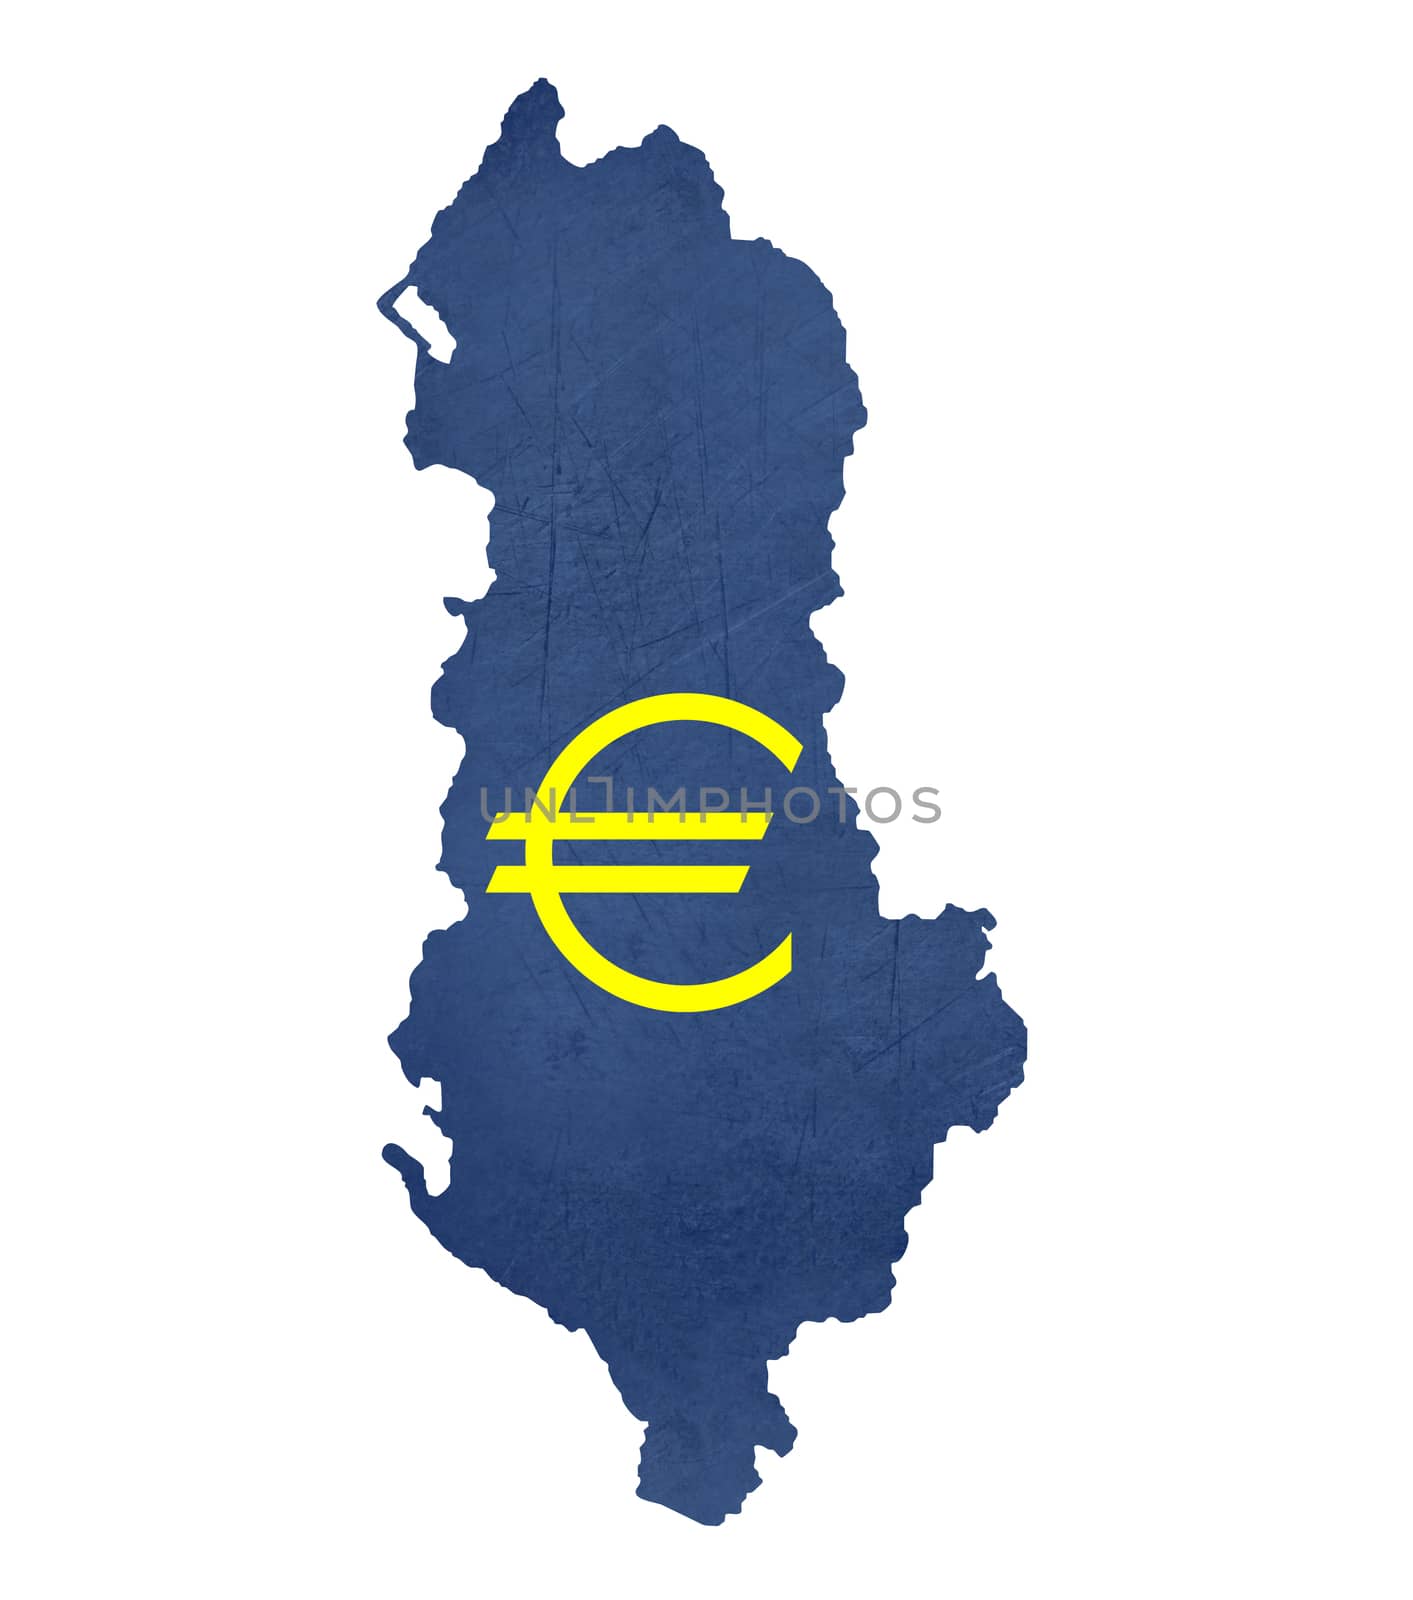 European currency symbol on map of Albania isolated on white background.